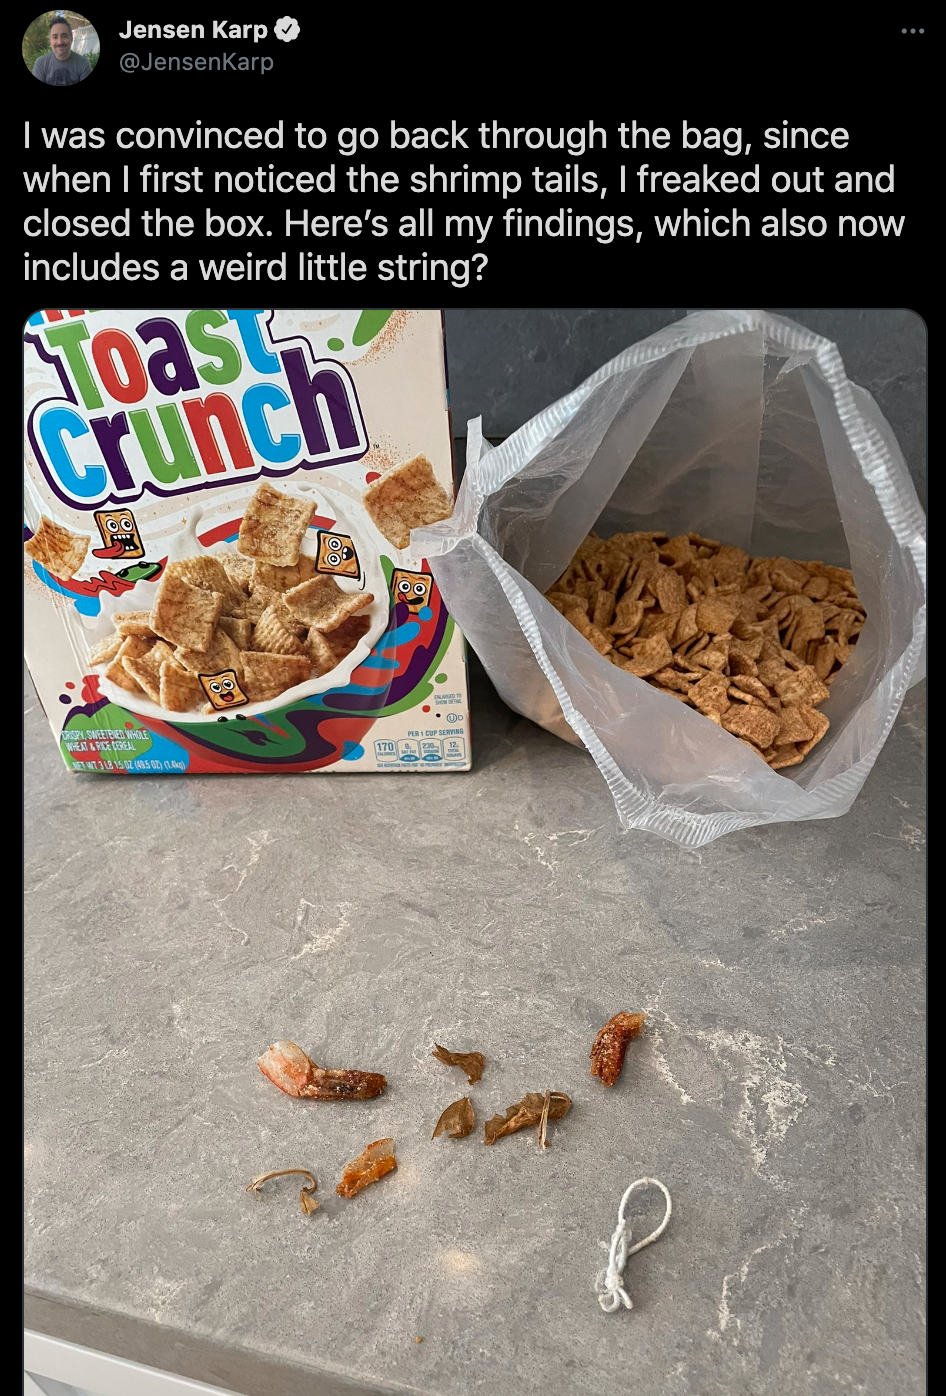 cinnamon toast crunch shrimp tails - jensen Karp I was convinced to go back through the bag, since when I first noticed the shrimp tails, I freaked out and closed the box. Here's all my findings, which also now includes a weird little string? Toast Crunch